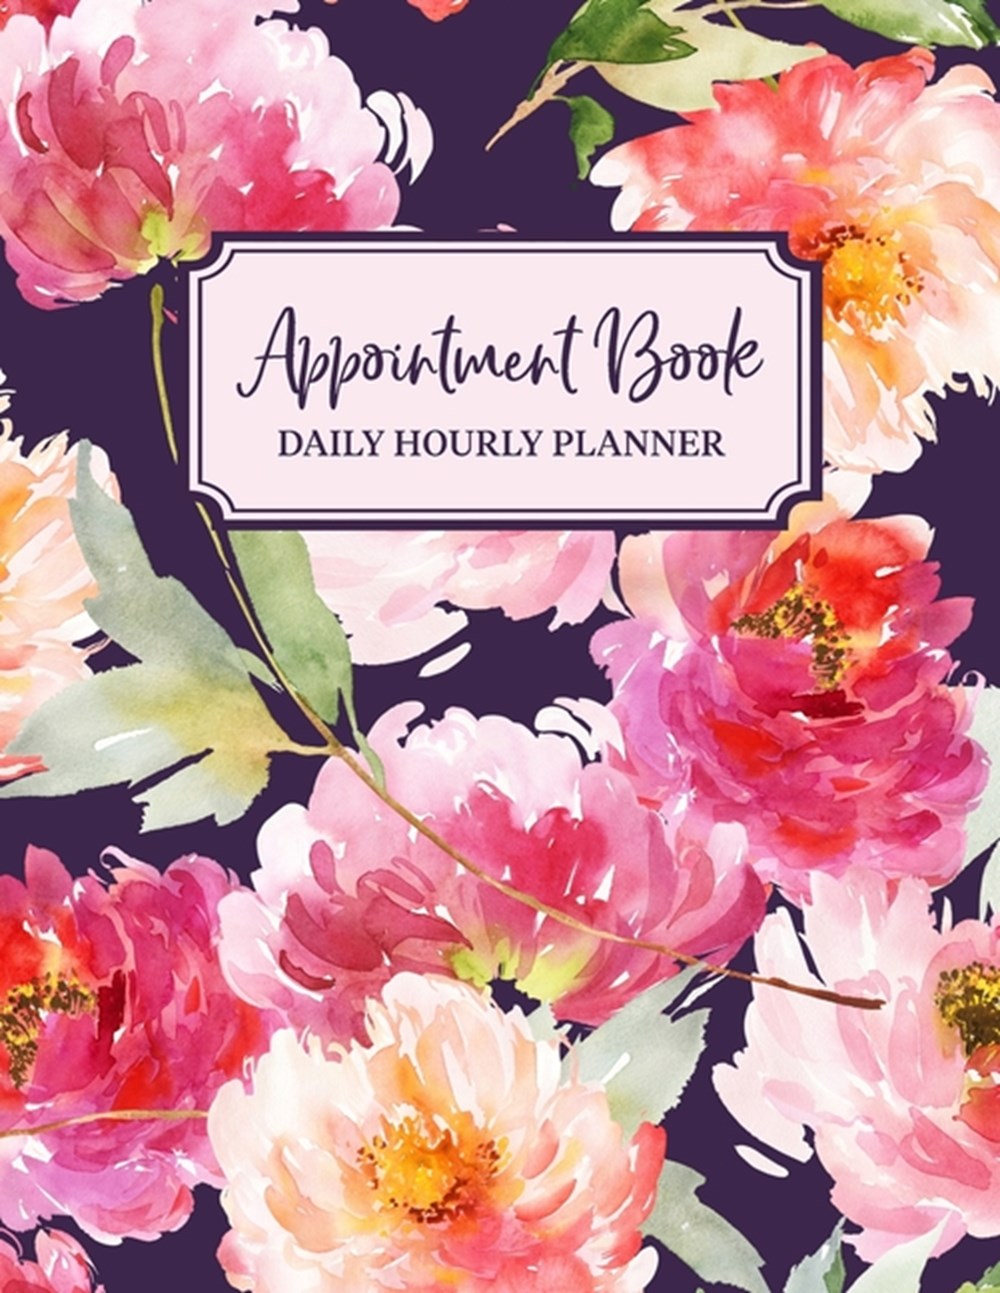 Undated Appointment Book Appointment Planner, Daily Hourly Planner Undated Daily Planner Monday - Su